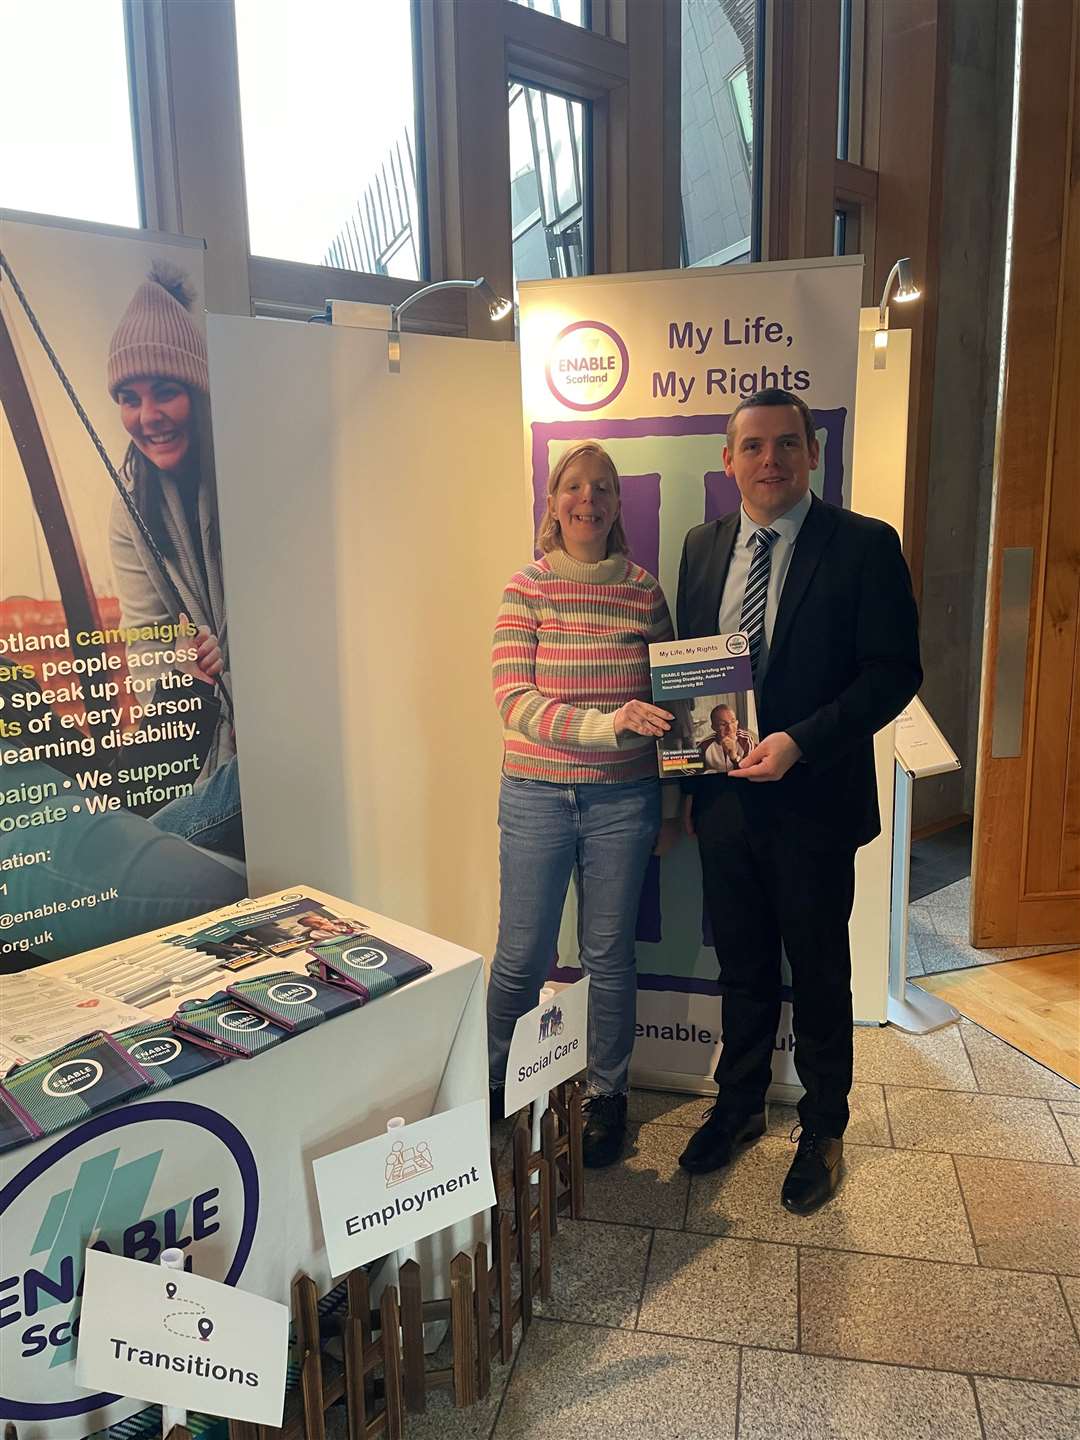 Douglas Ross MP meets Heather Gilchrist from Enable in the Scottish Parliament.